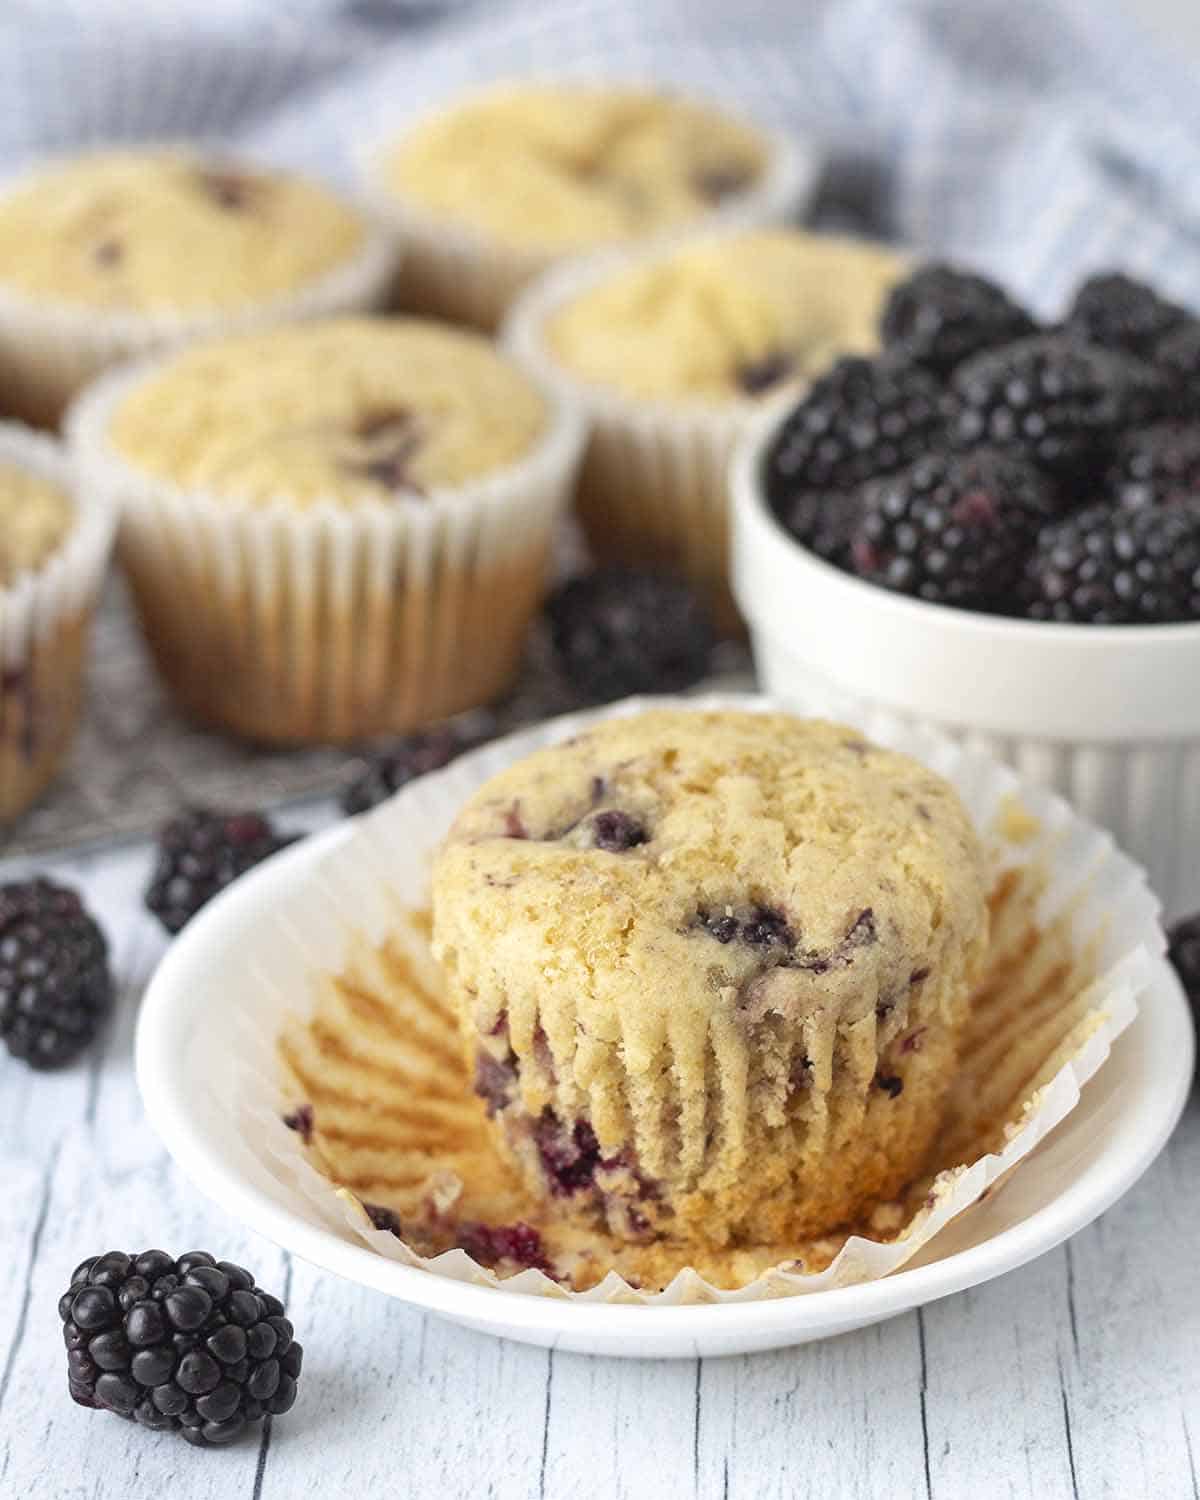 A blackberry muffin on a plate, the muffin wrapper has been peeled away to be removed.